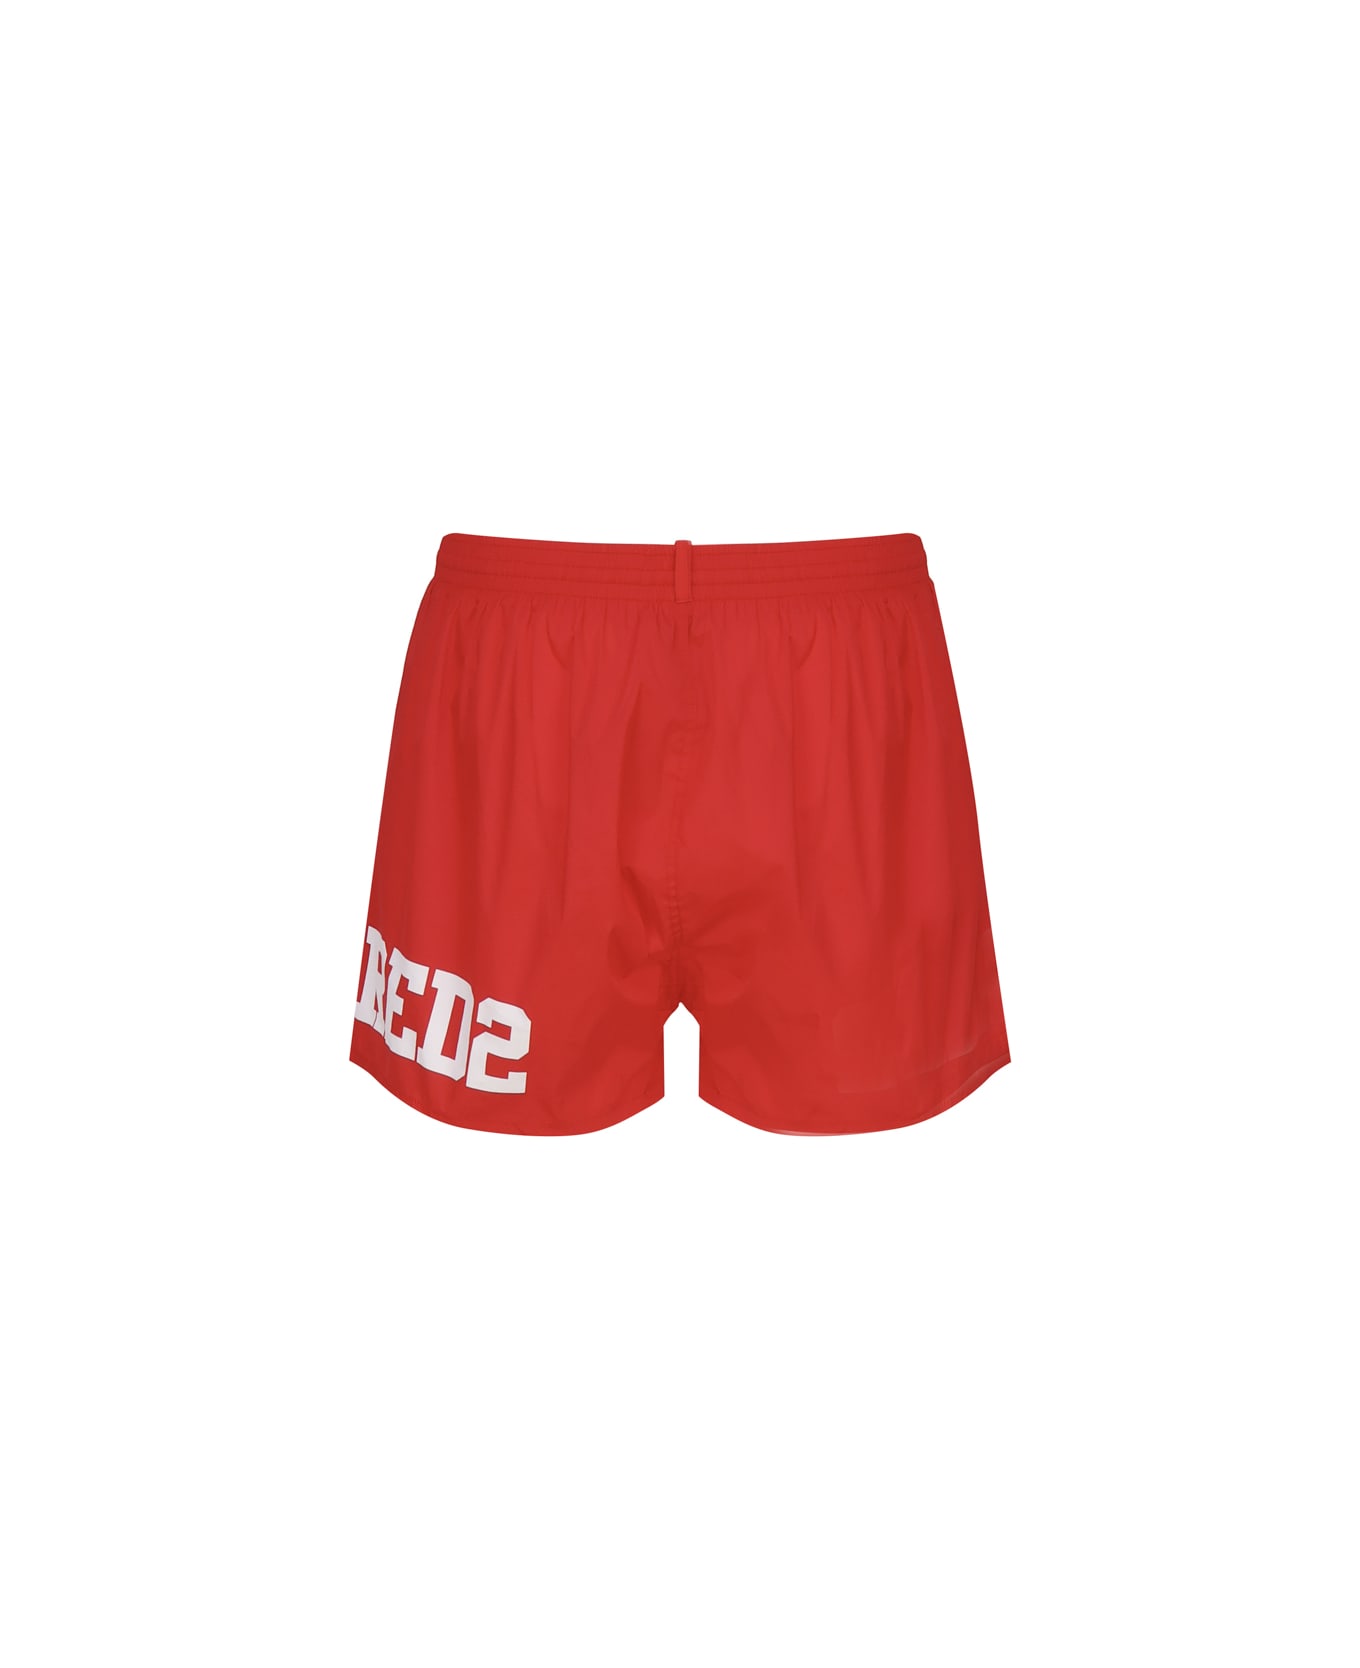 Dsquared2 Logo Swimsuit In Contrasting Color - RED 水着